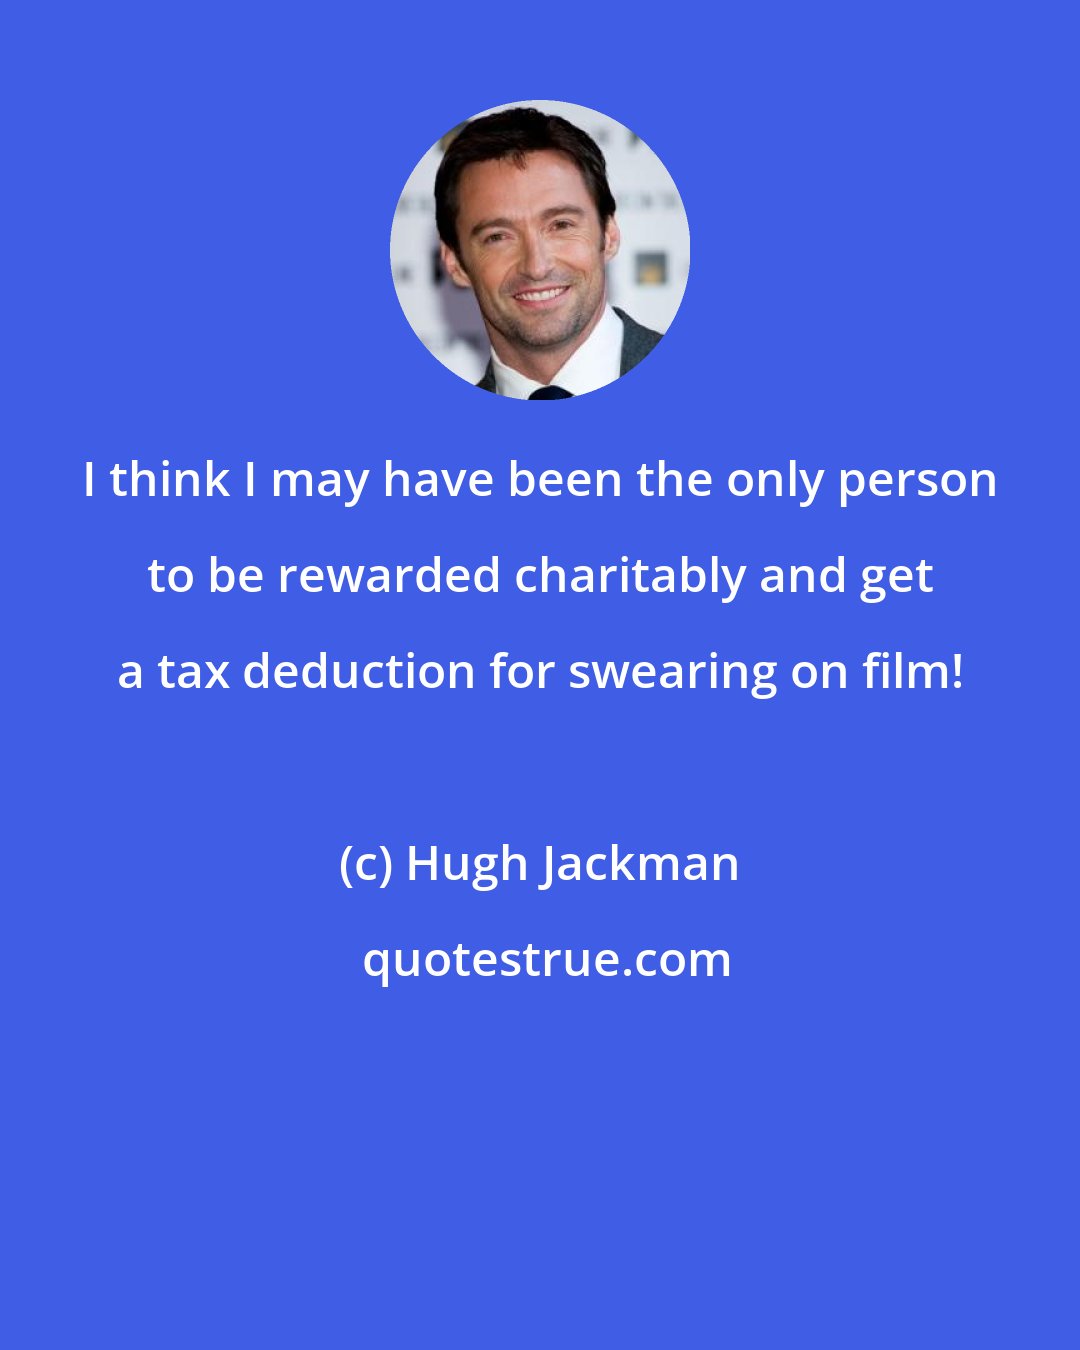 Hugh Jackman: I think I may have been the only person to be rewarded charitably and get a tax deduction for swearing on film!